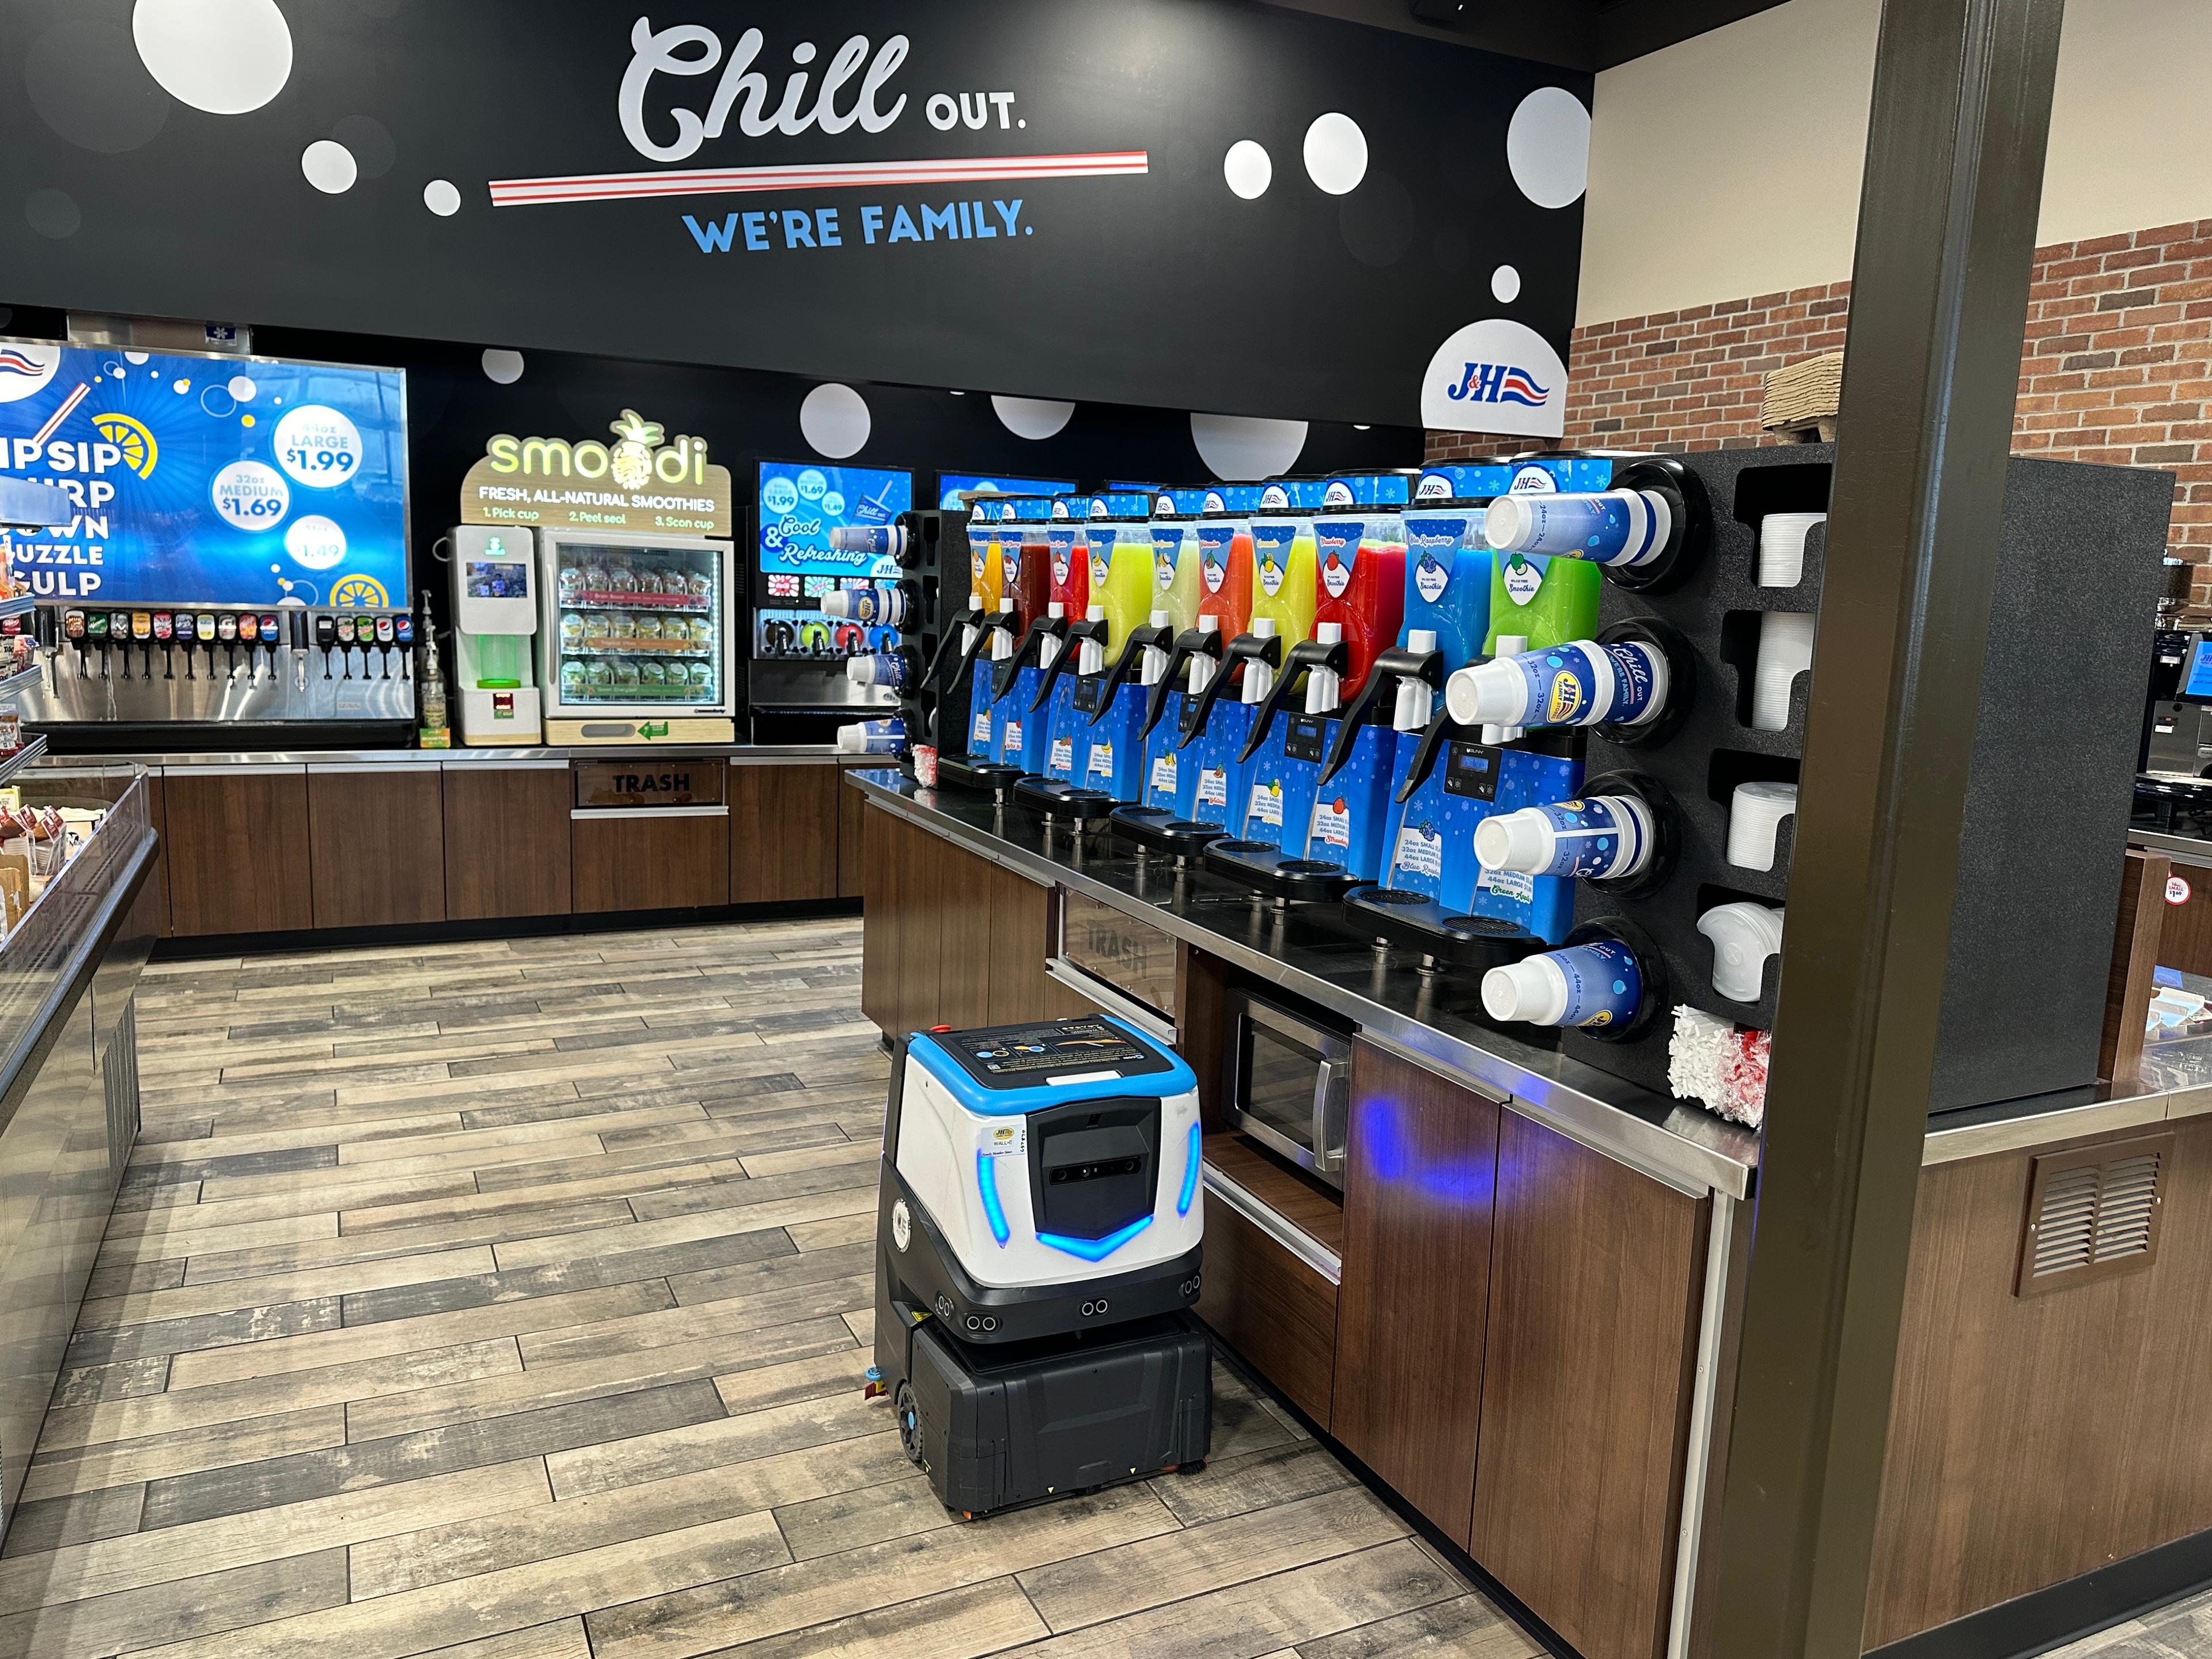 Cobi 18, robotic floor scrubber, cleaning at convenience store